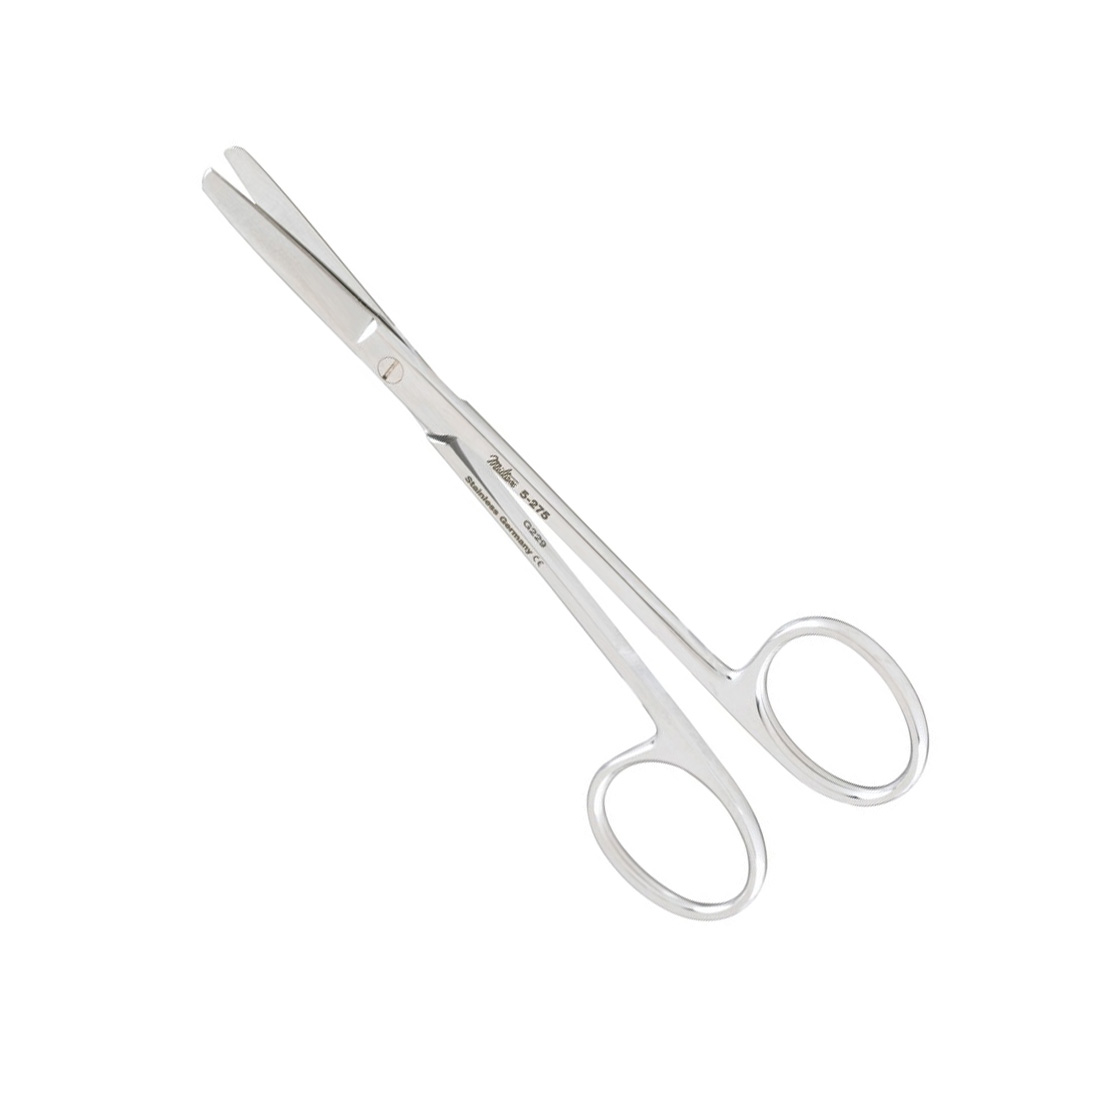 Wagner Plastic Surgery Scissors, Straight, Blunt-Blunt Points, Serrated Blade